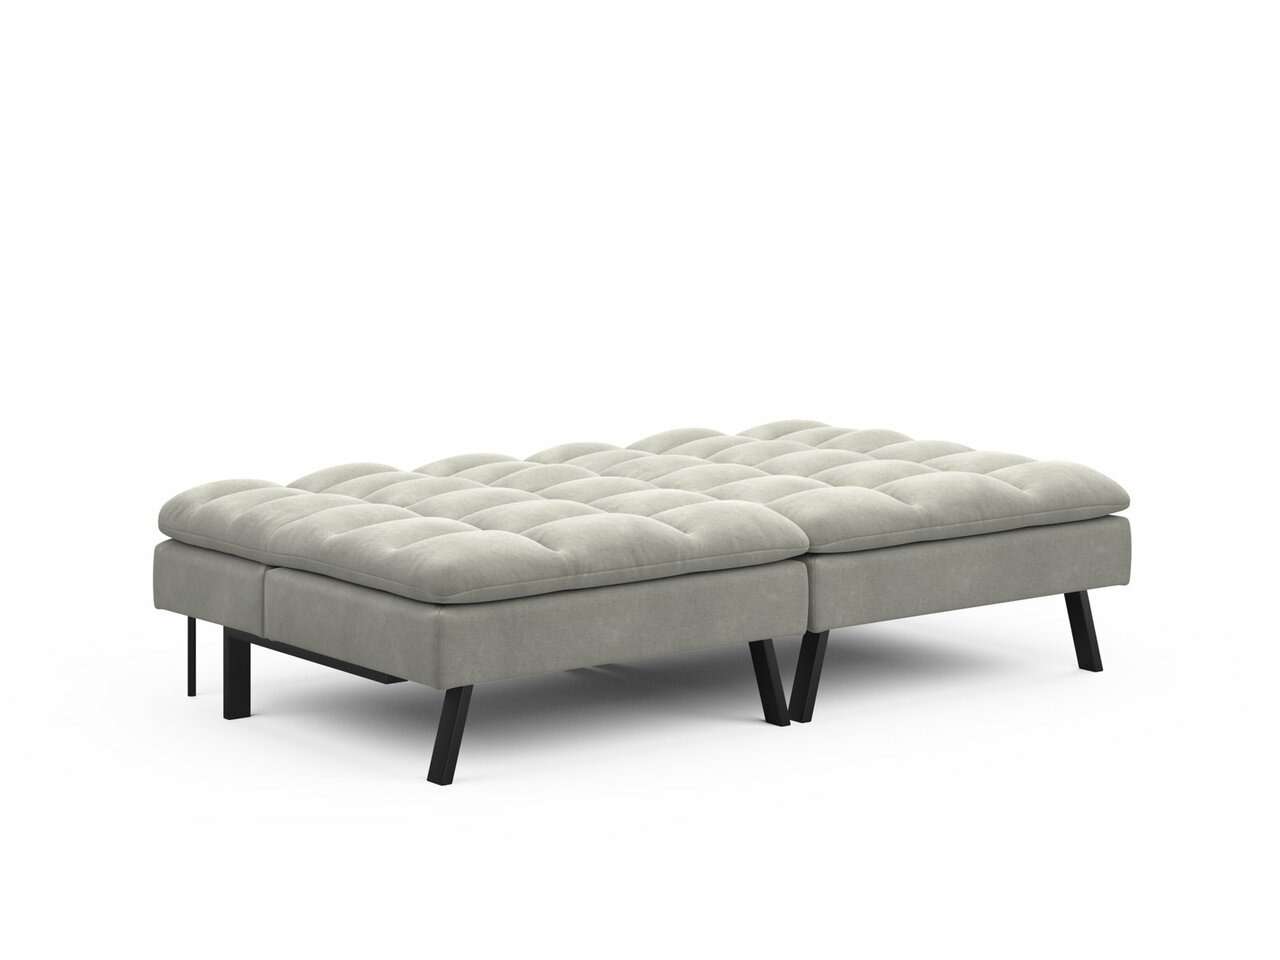 Duet 2-in-1 Sofa Bed 3 Seater Sofa Bed Light Grey